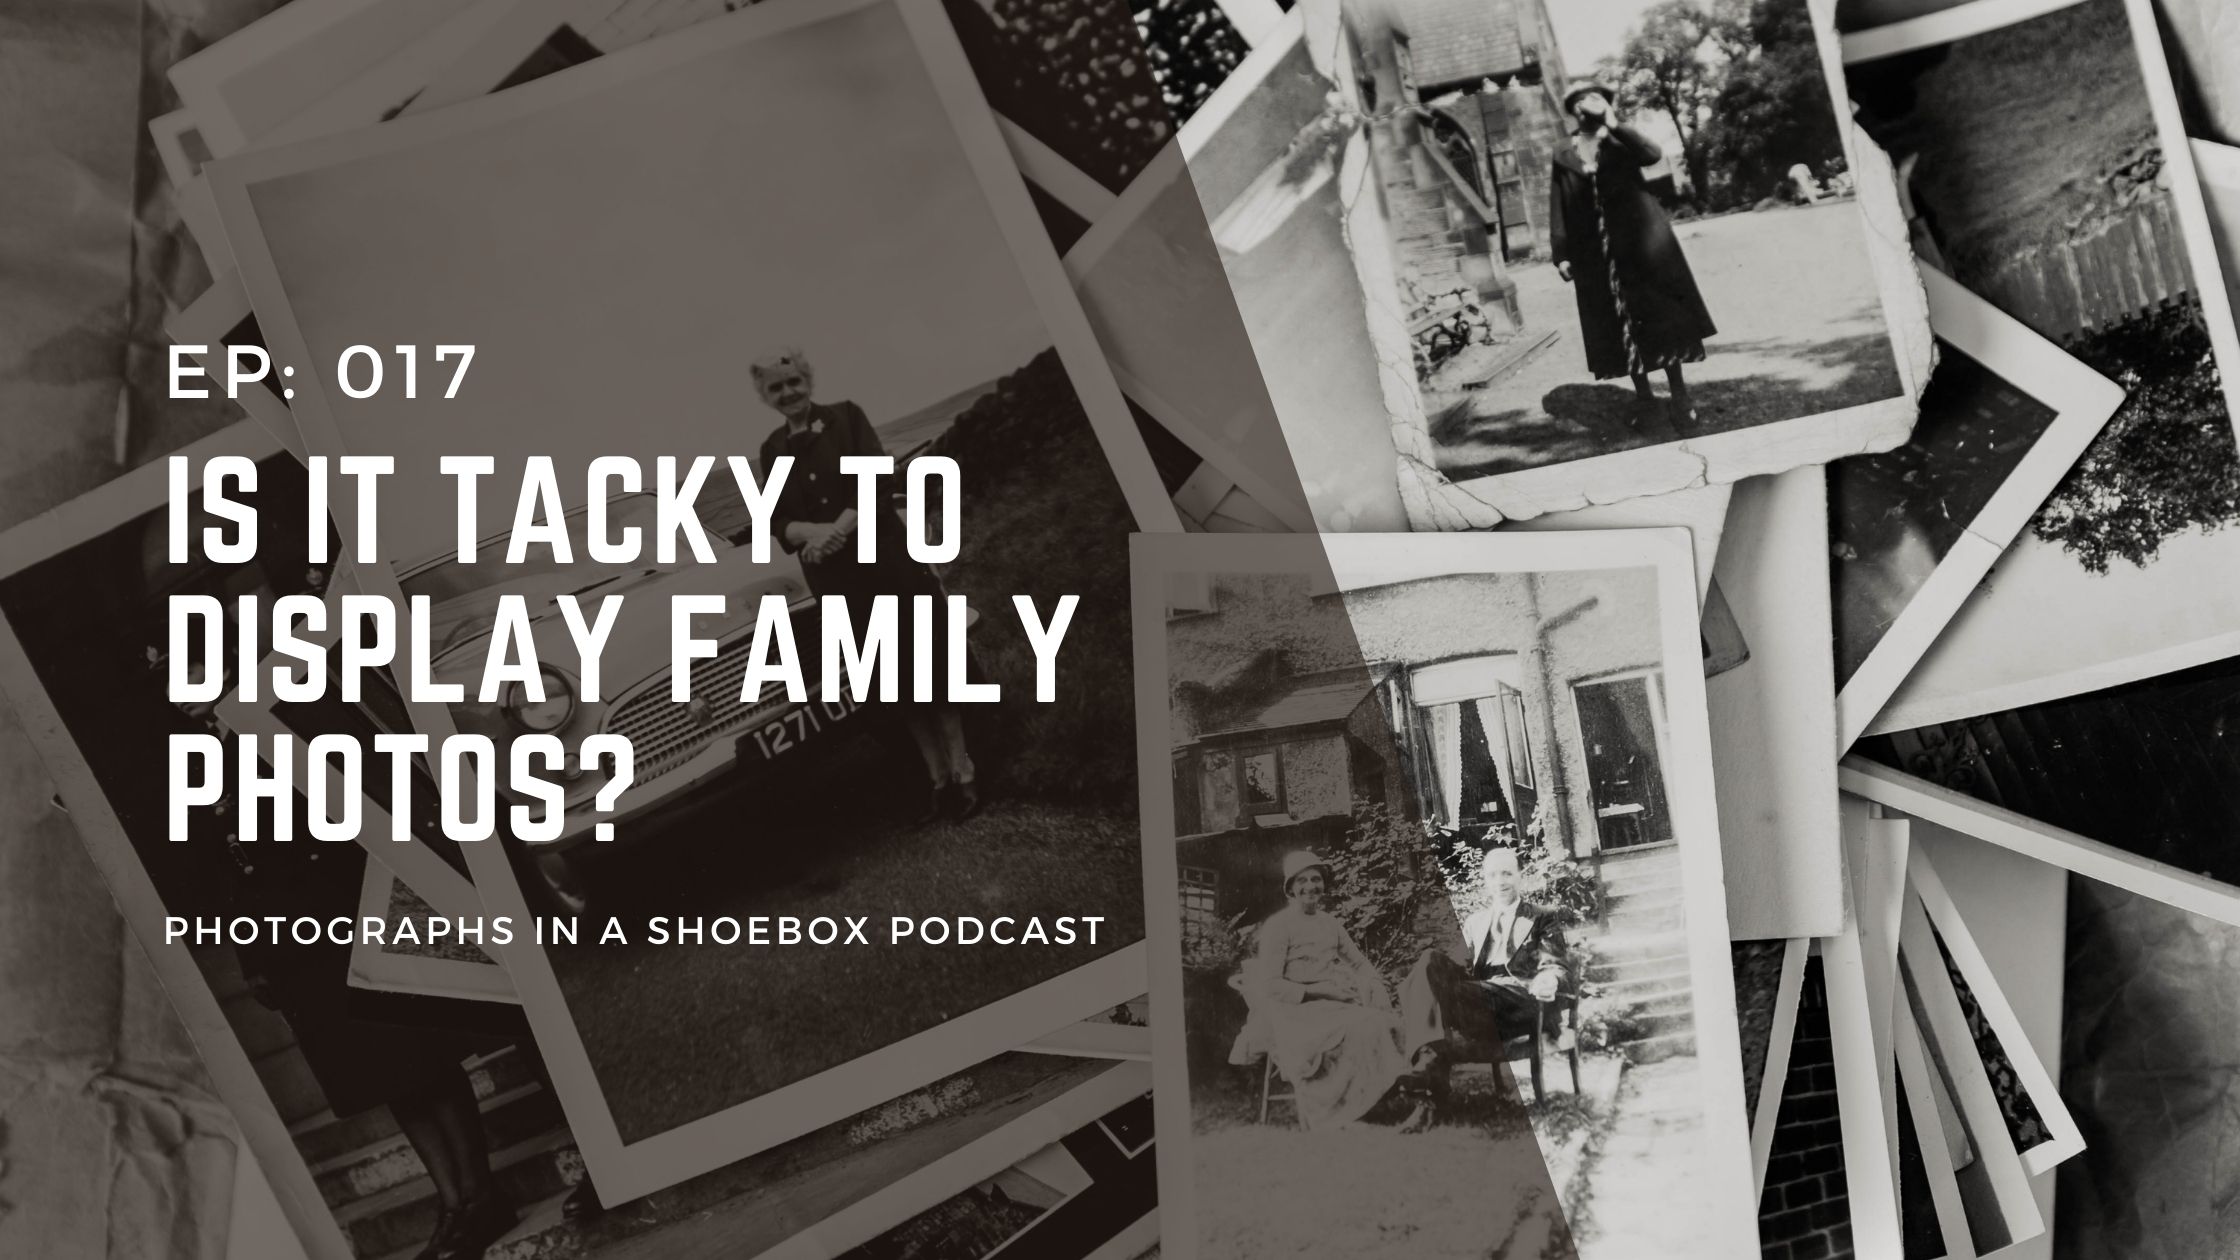 Cover image for podcast episode 017 - is it tacky to display family photos